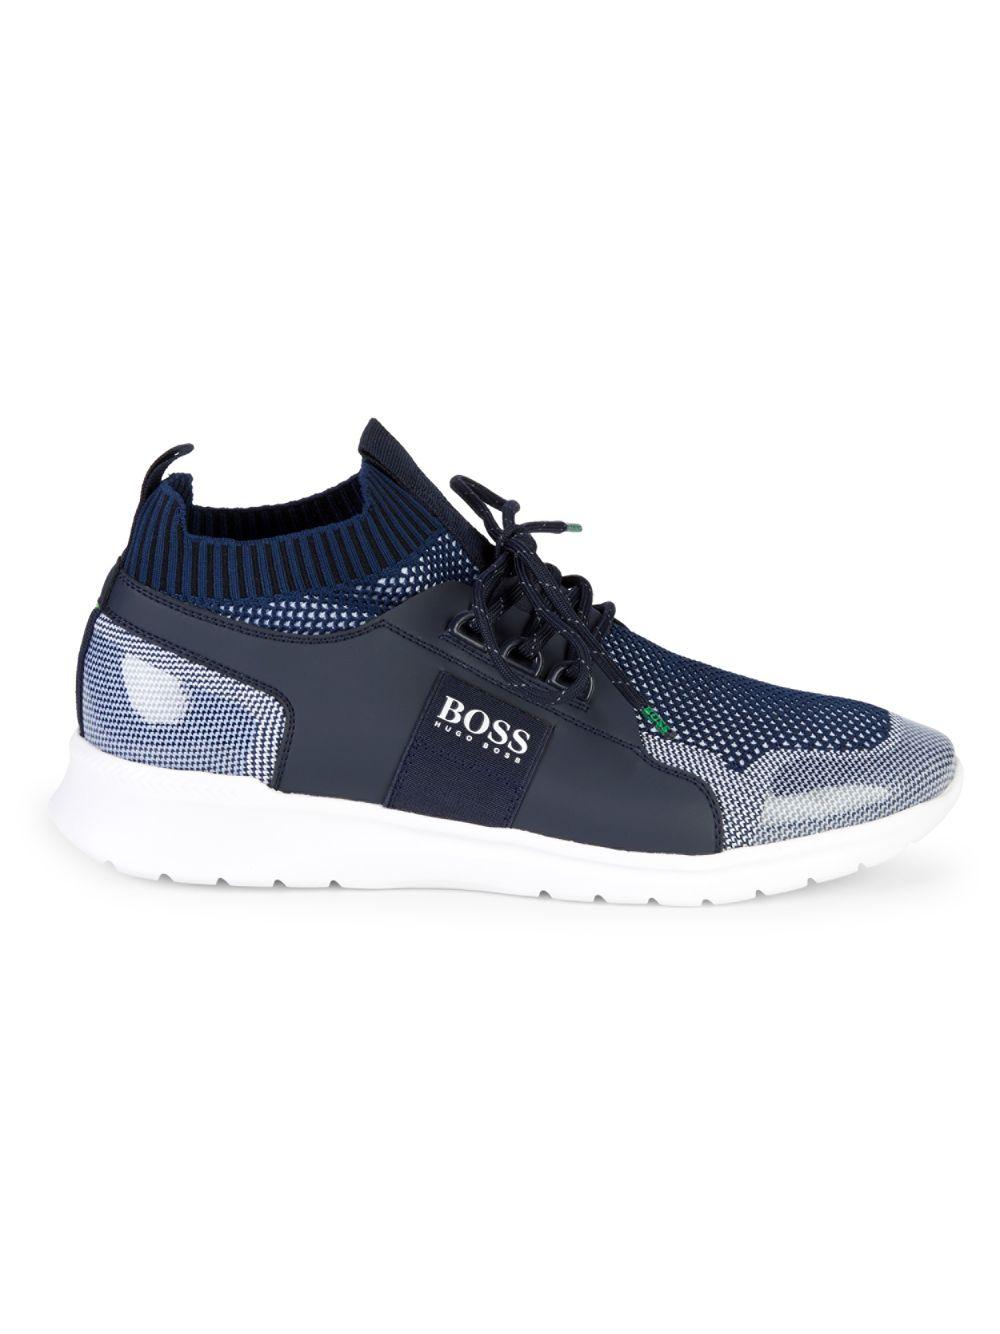 BOSS Extreme Knit Sneakers in Blue for Men - Lyst